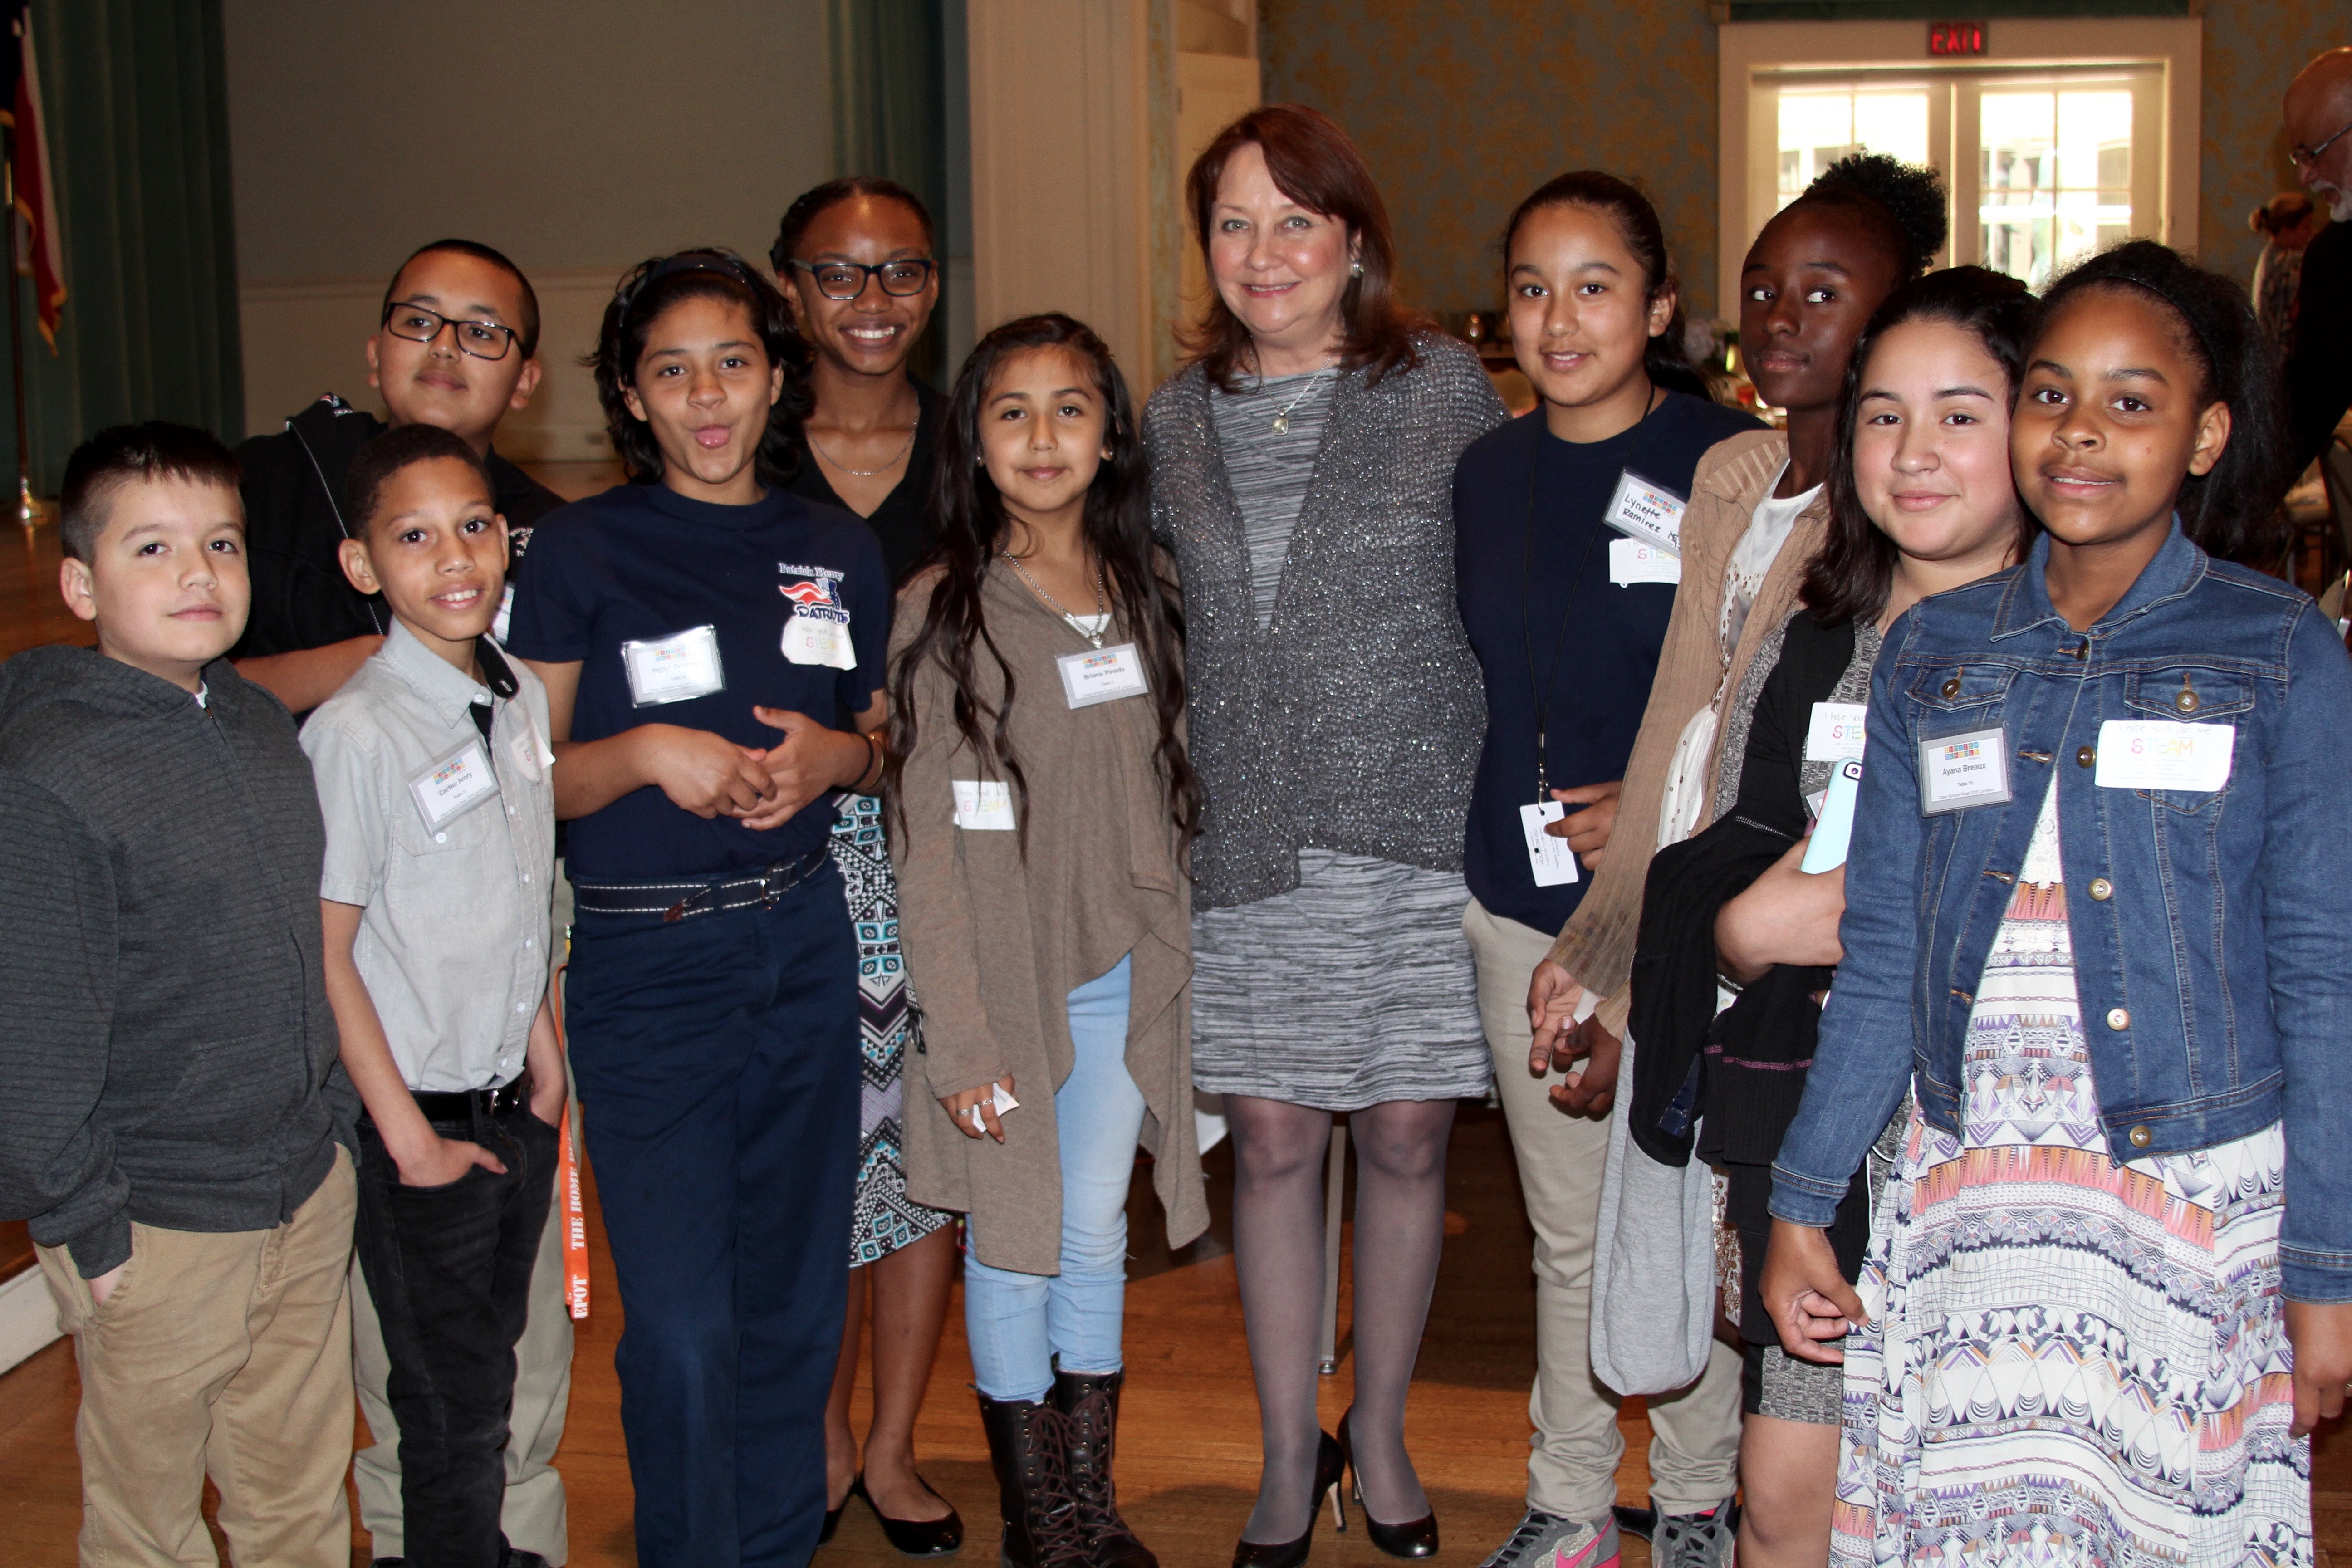 Texas First Lady Cecilia Abbott with students who are part of one of Citizen Schools Texas's programs